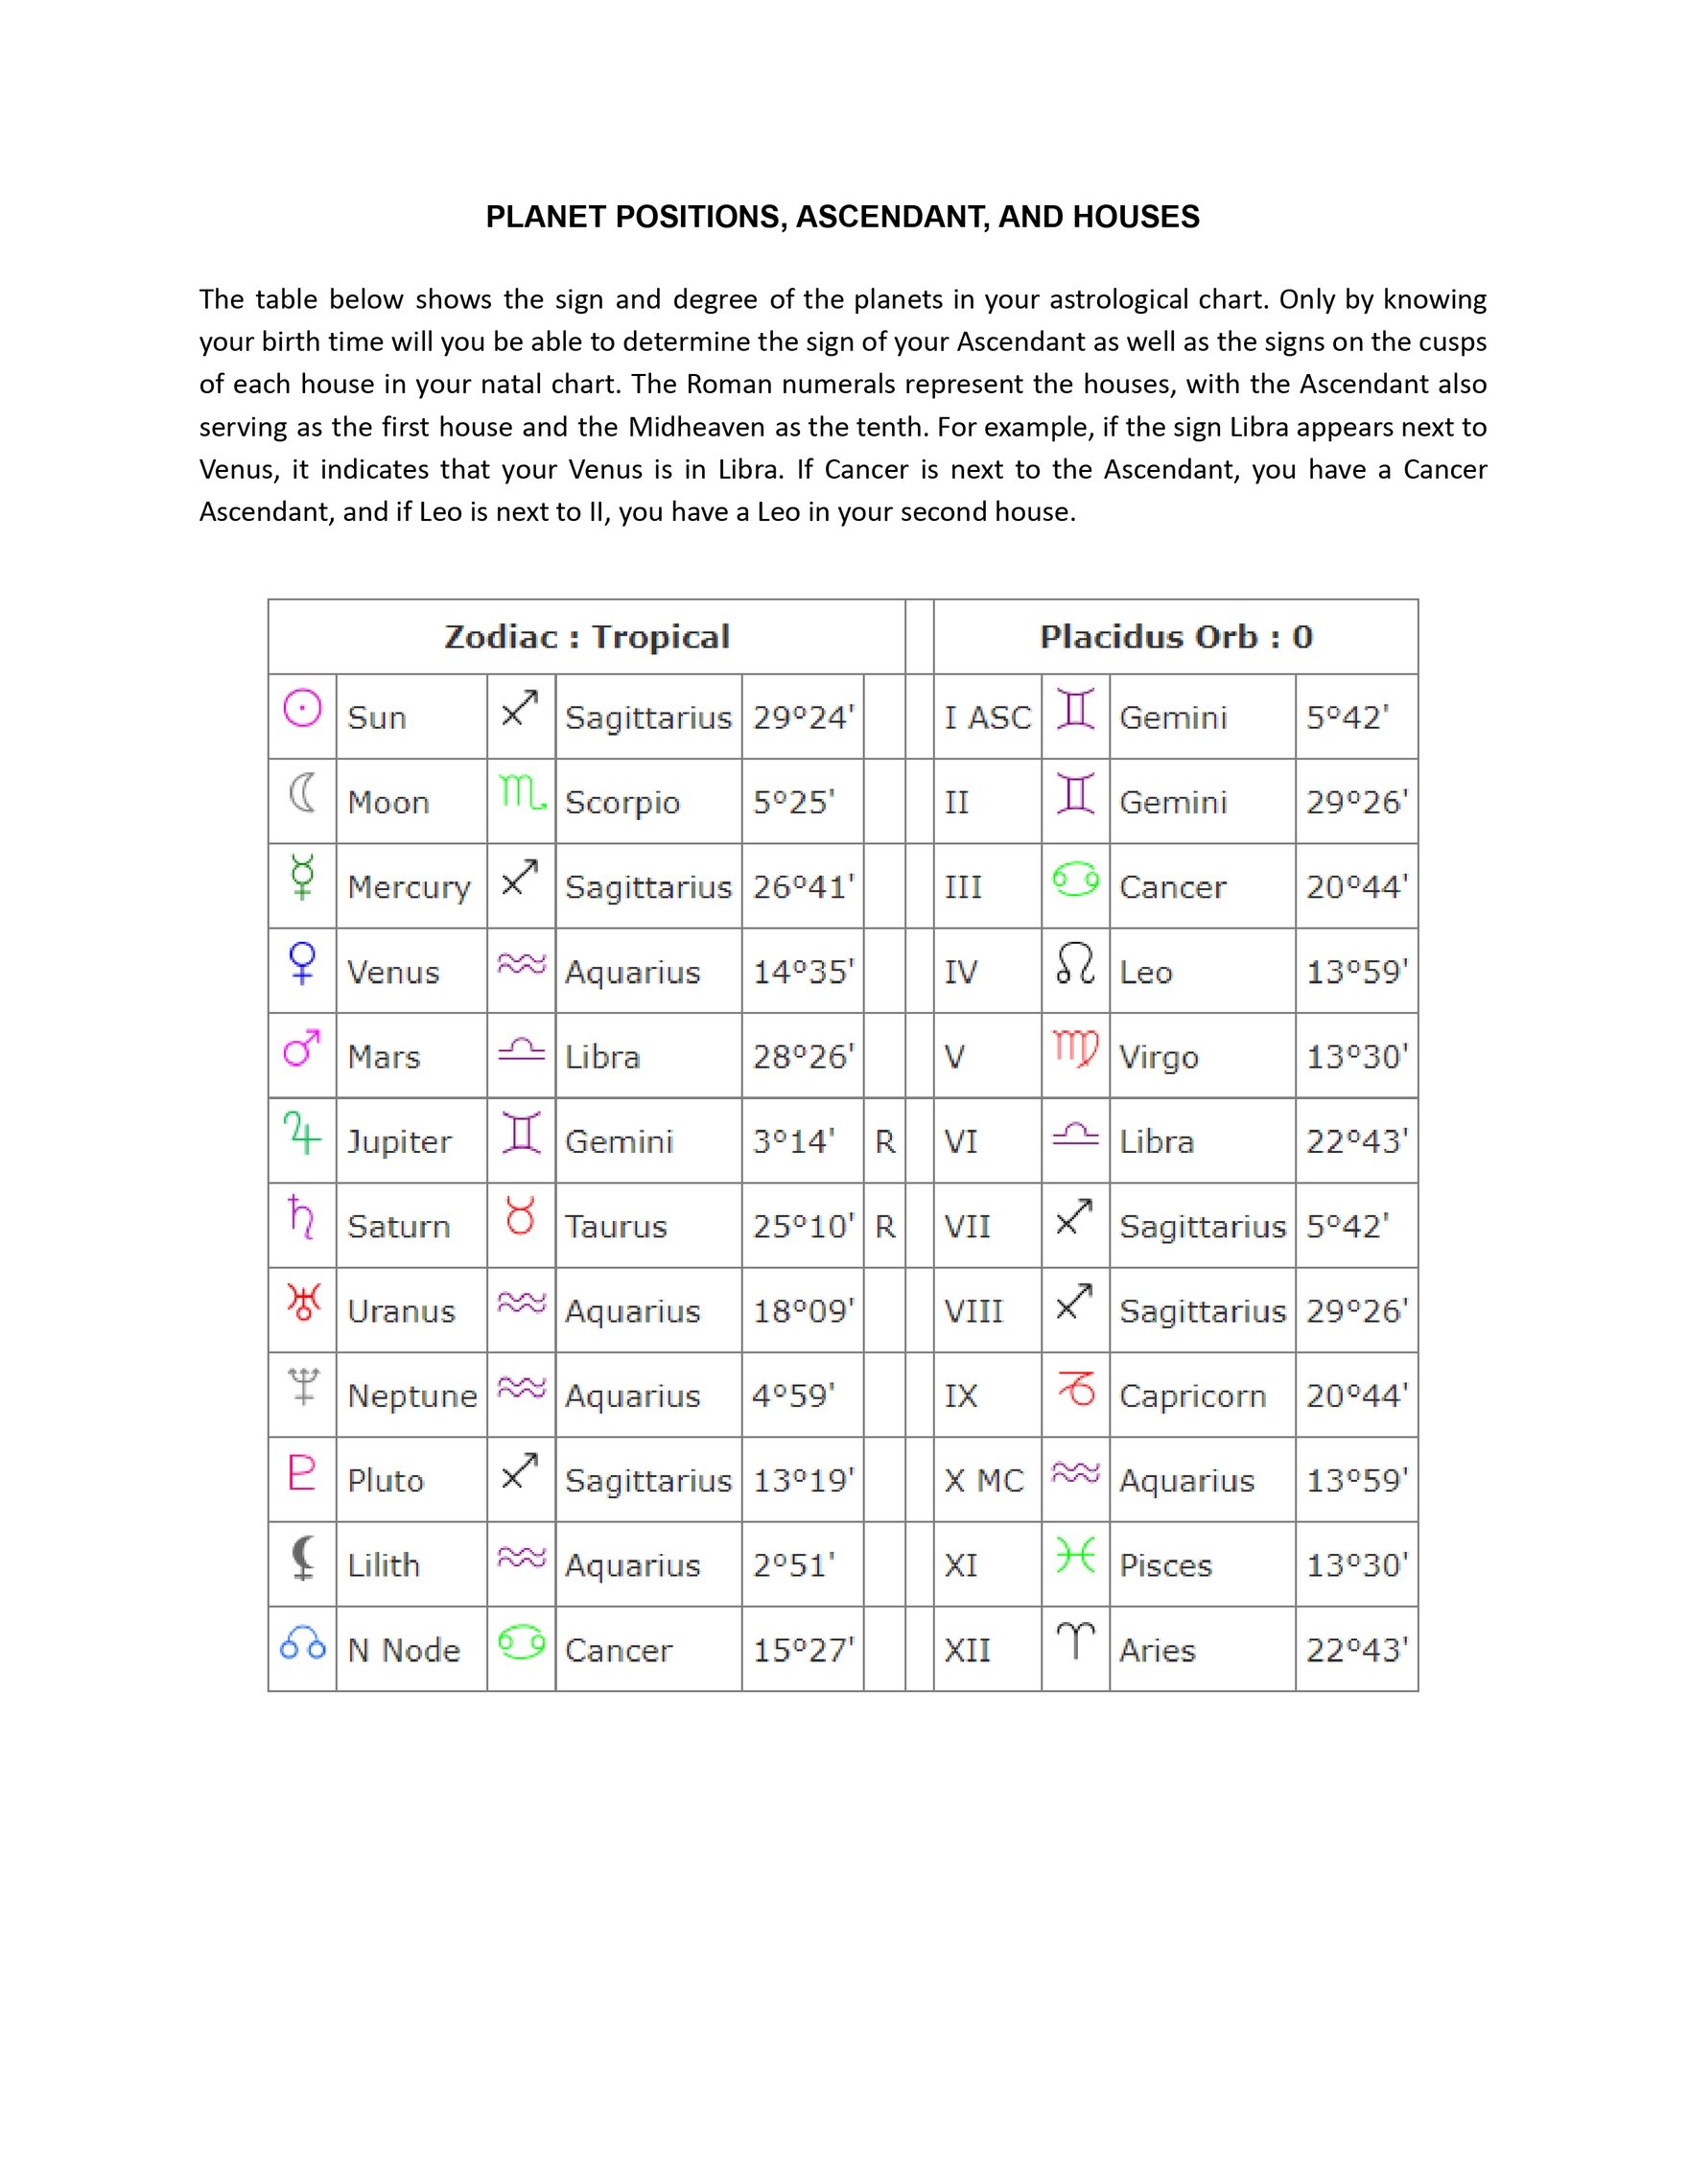 Personalized Astrology Natal Chart Template